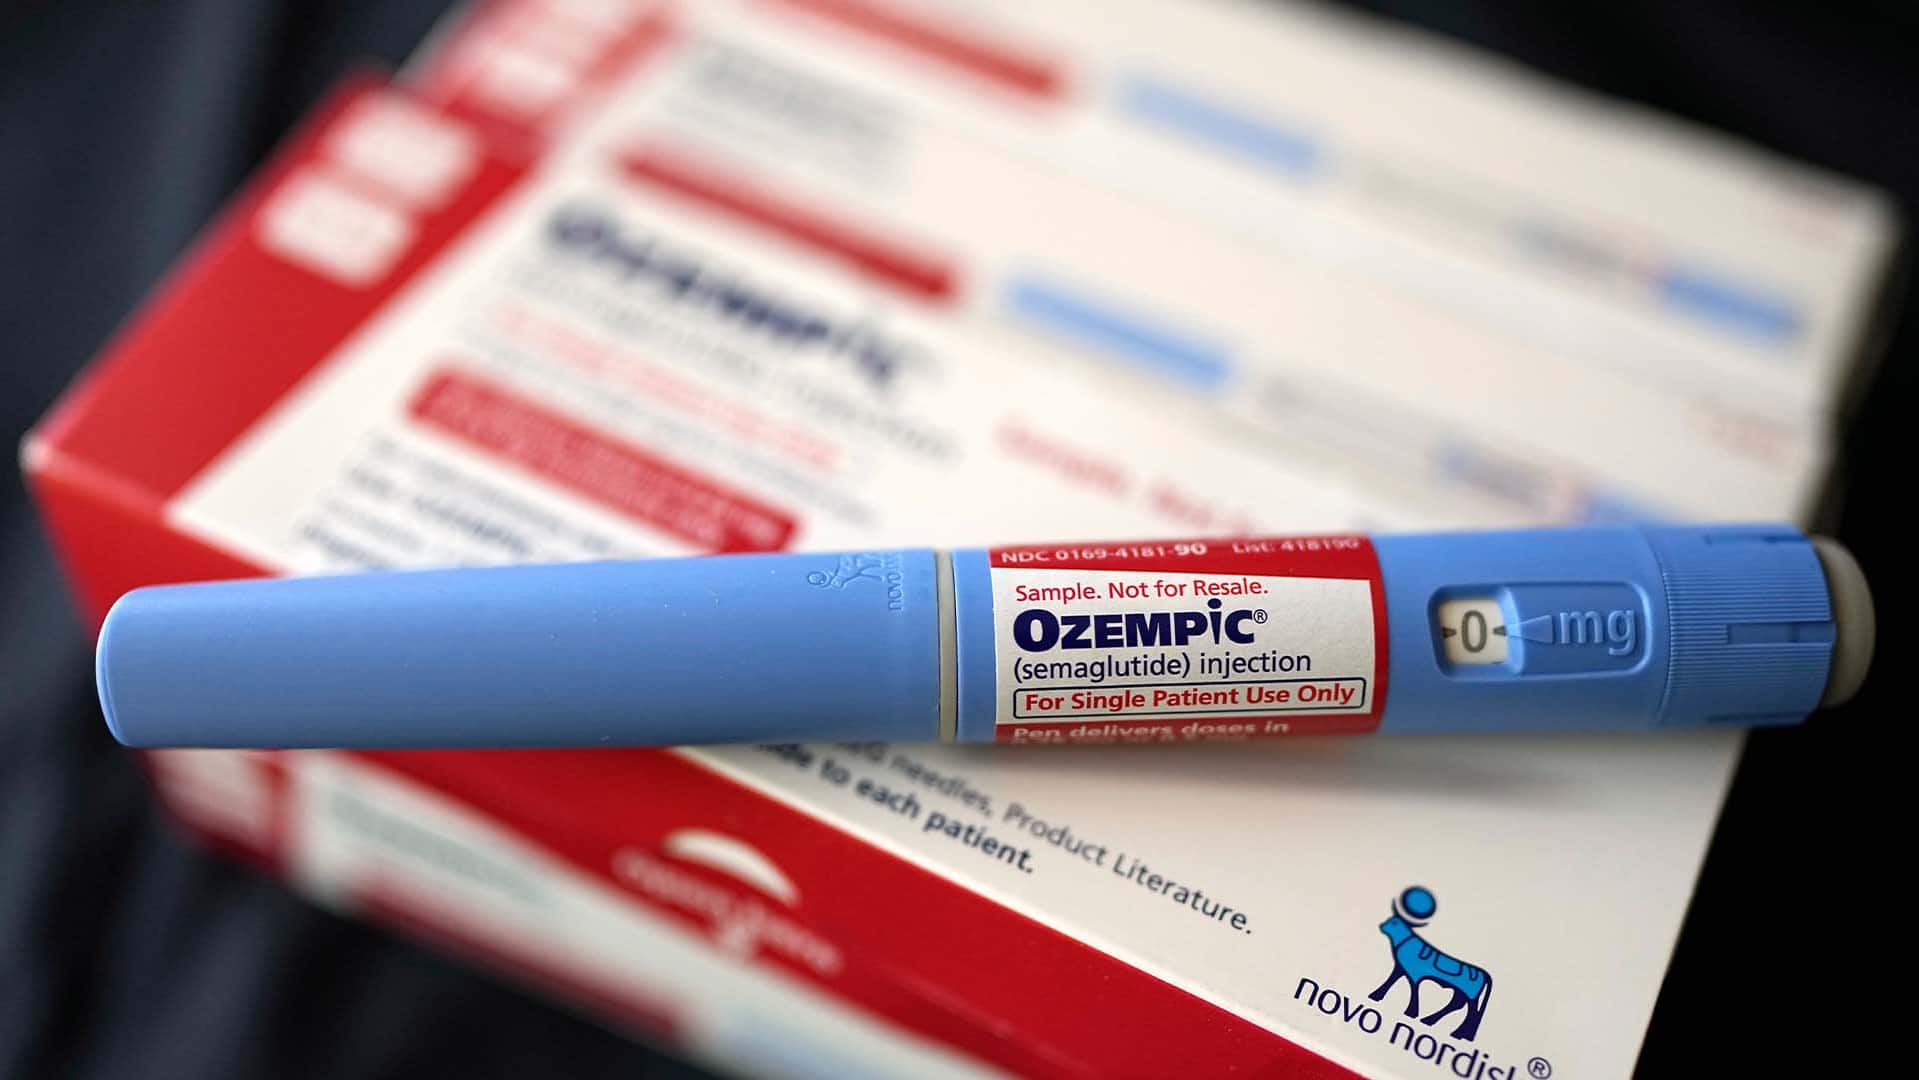 shortage of diabetes weight loss drug ozempic expected in canada says manufacturer